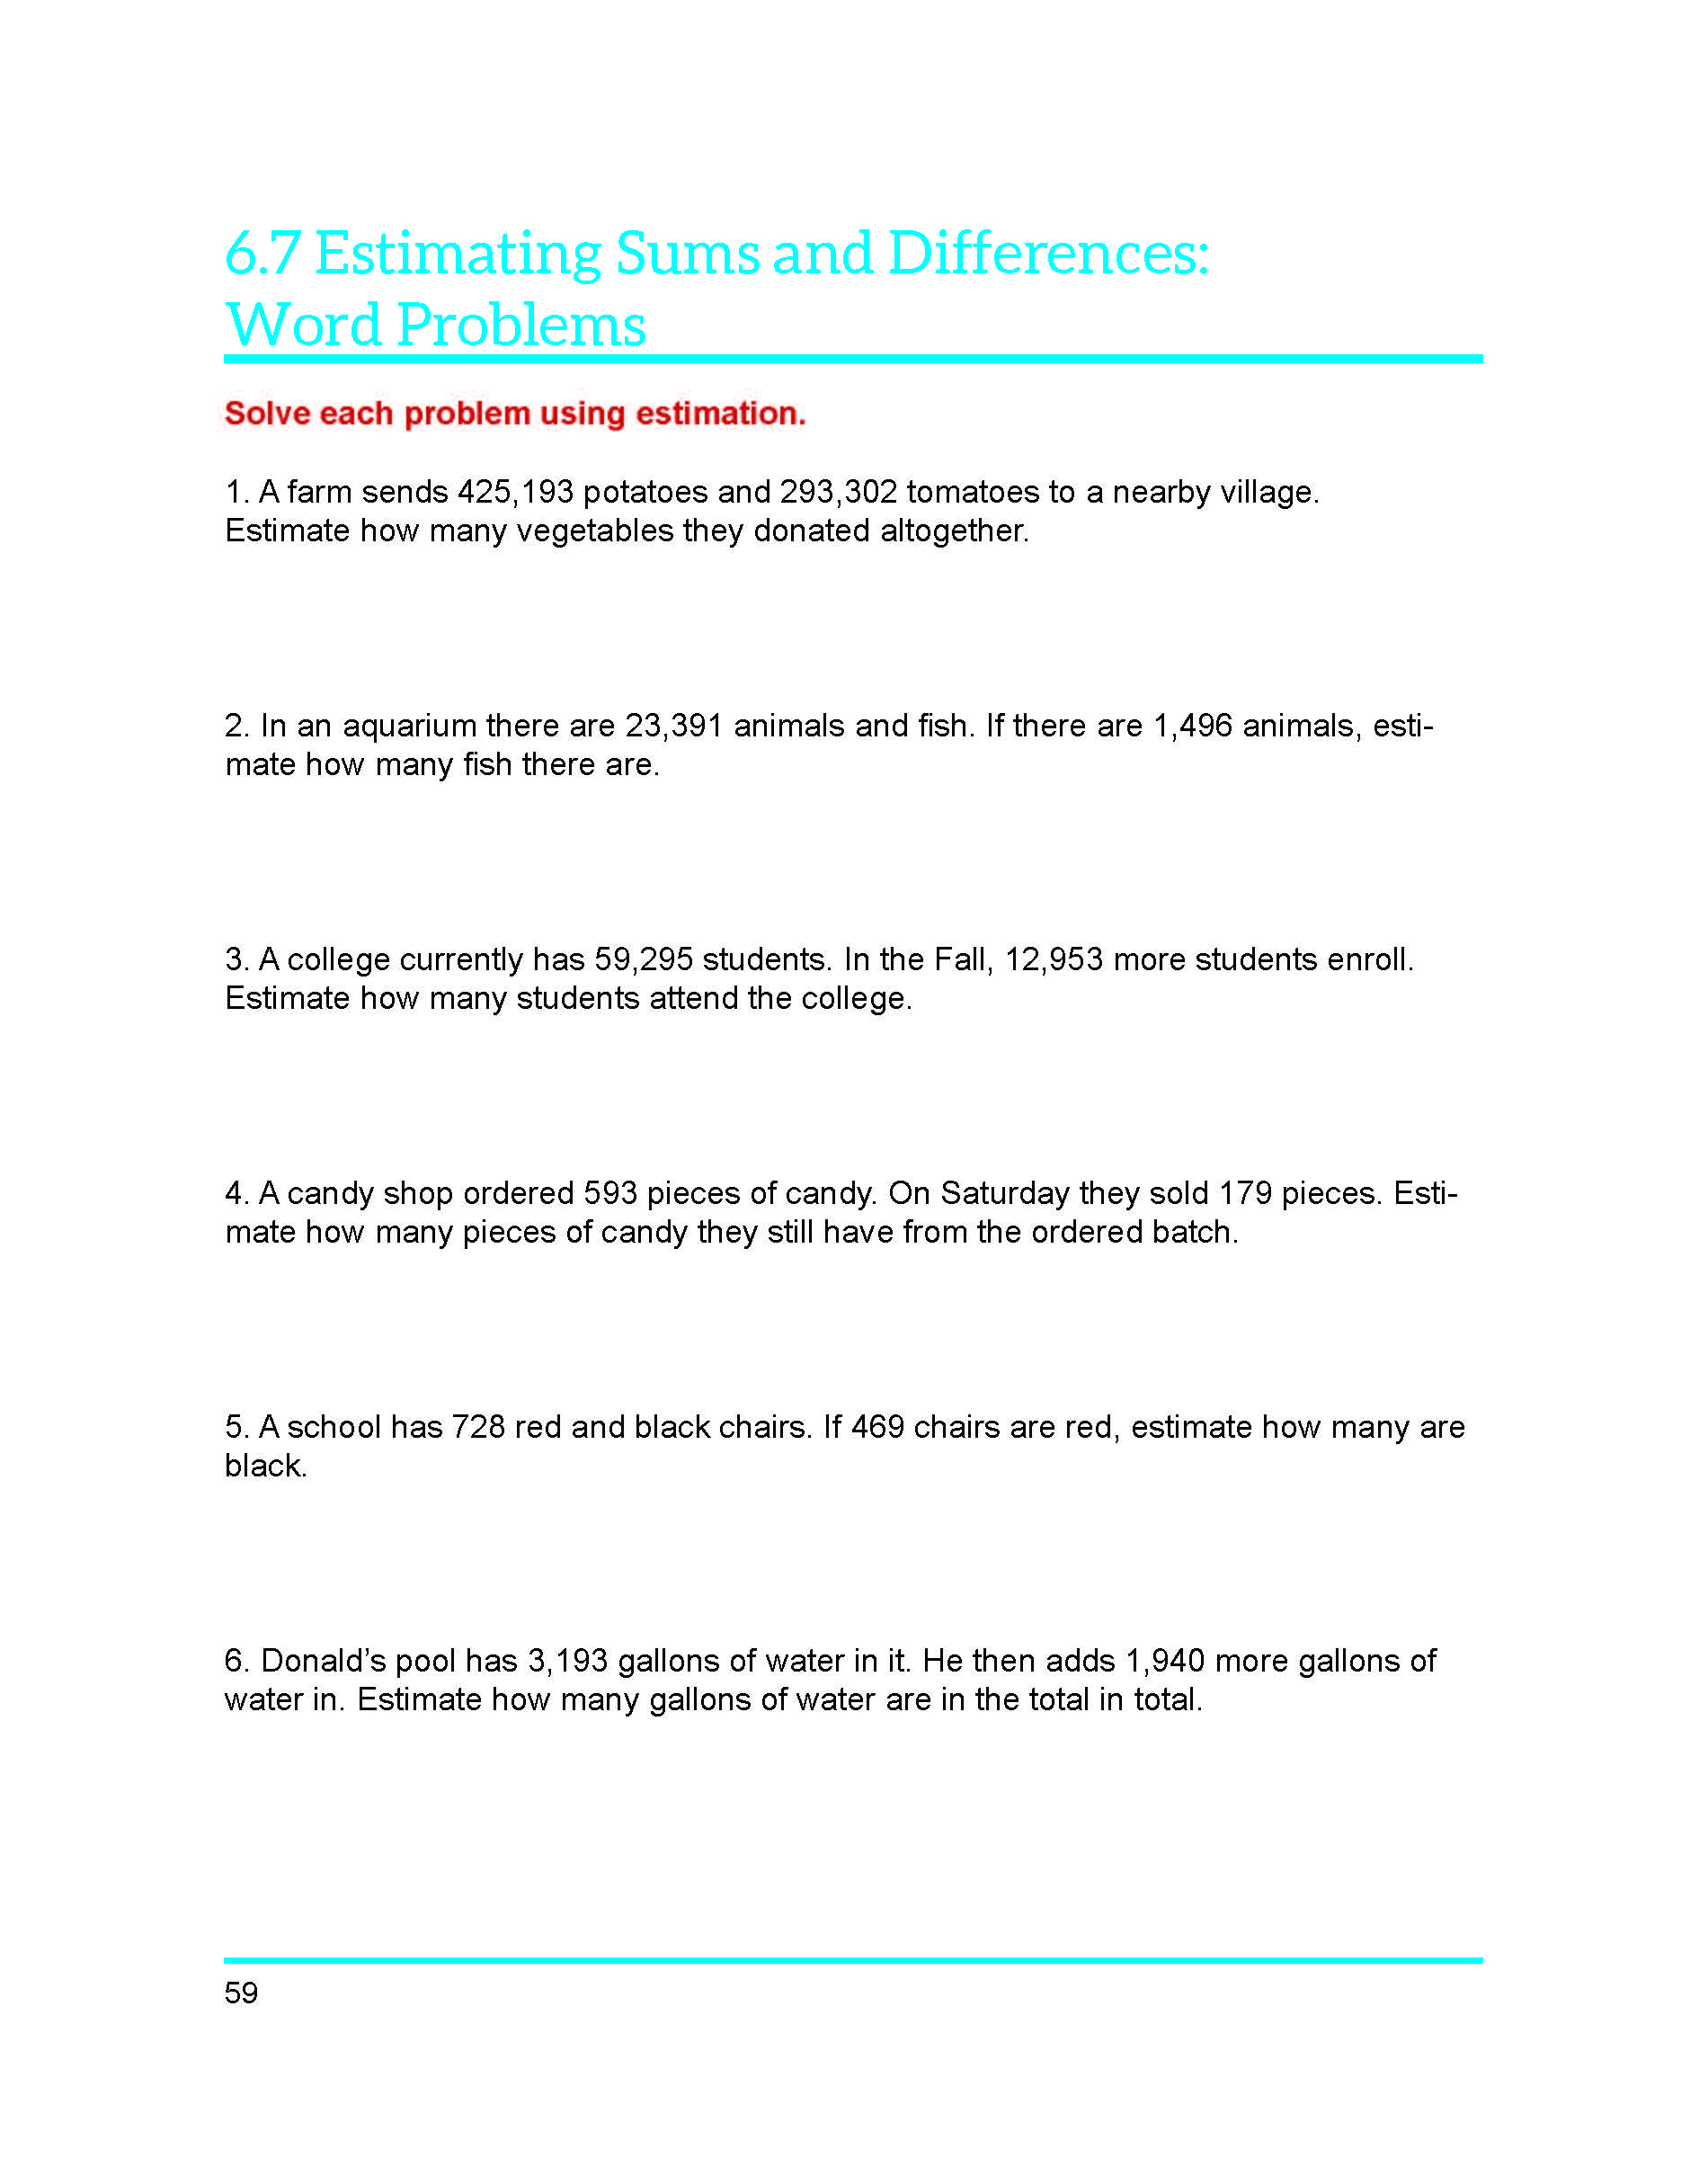 Grade-5-Estimating Sums-Differences-Word-Problems.jpg